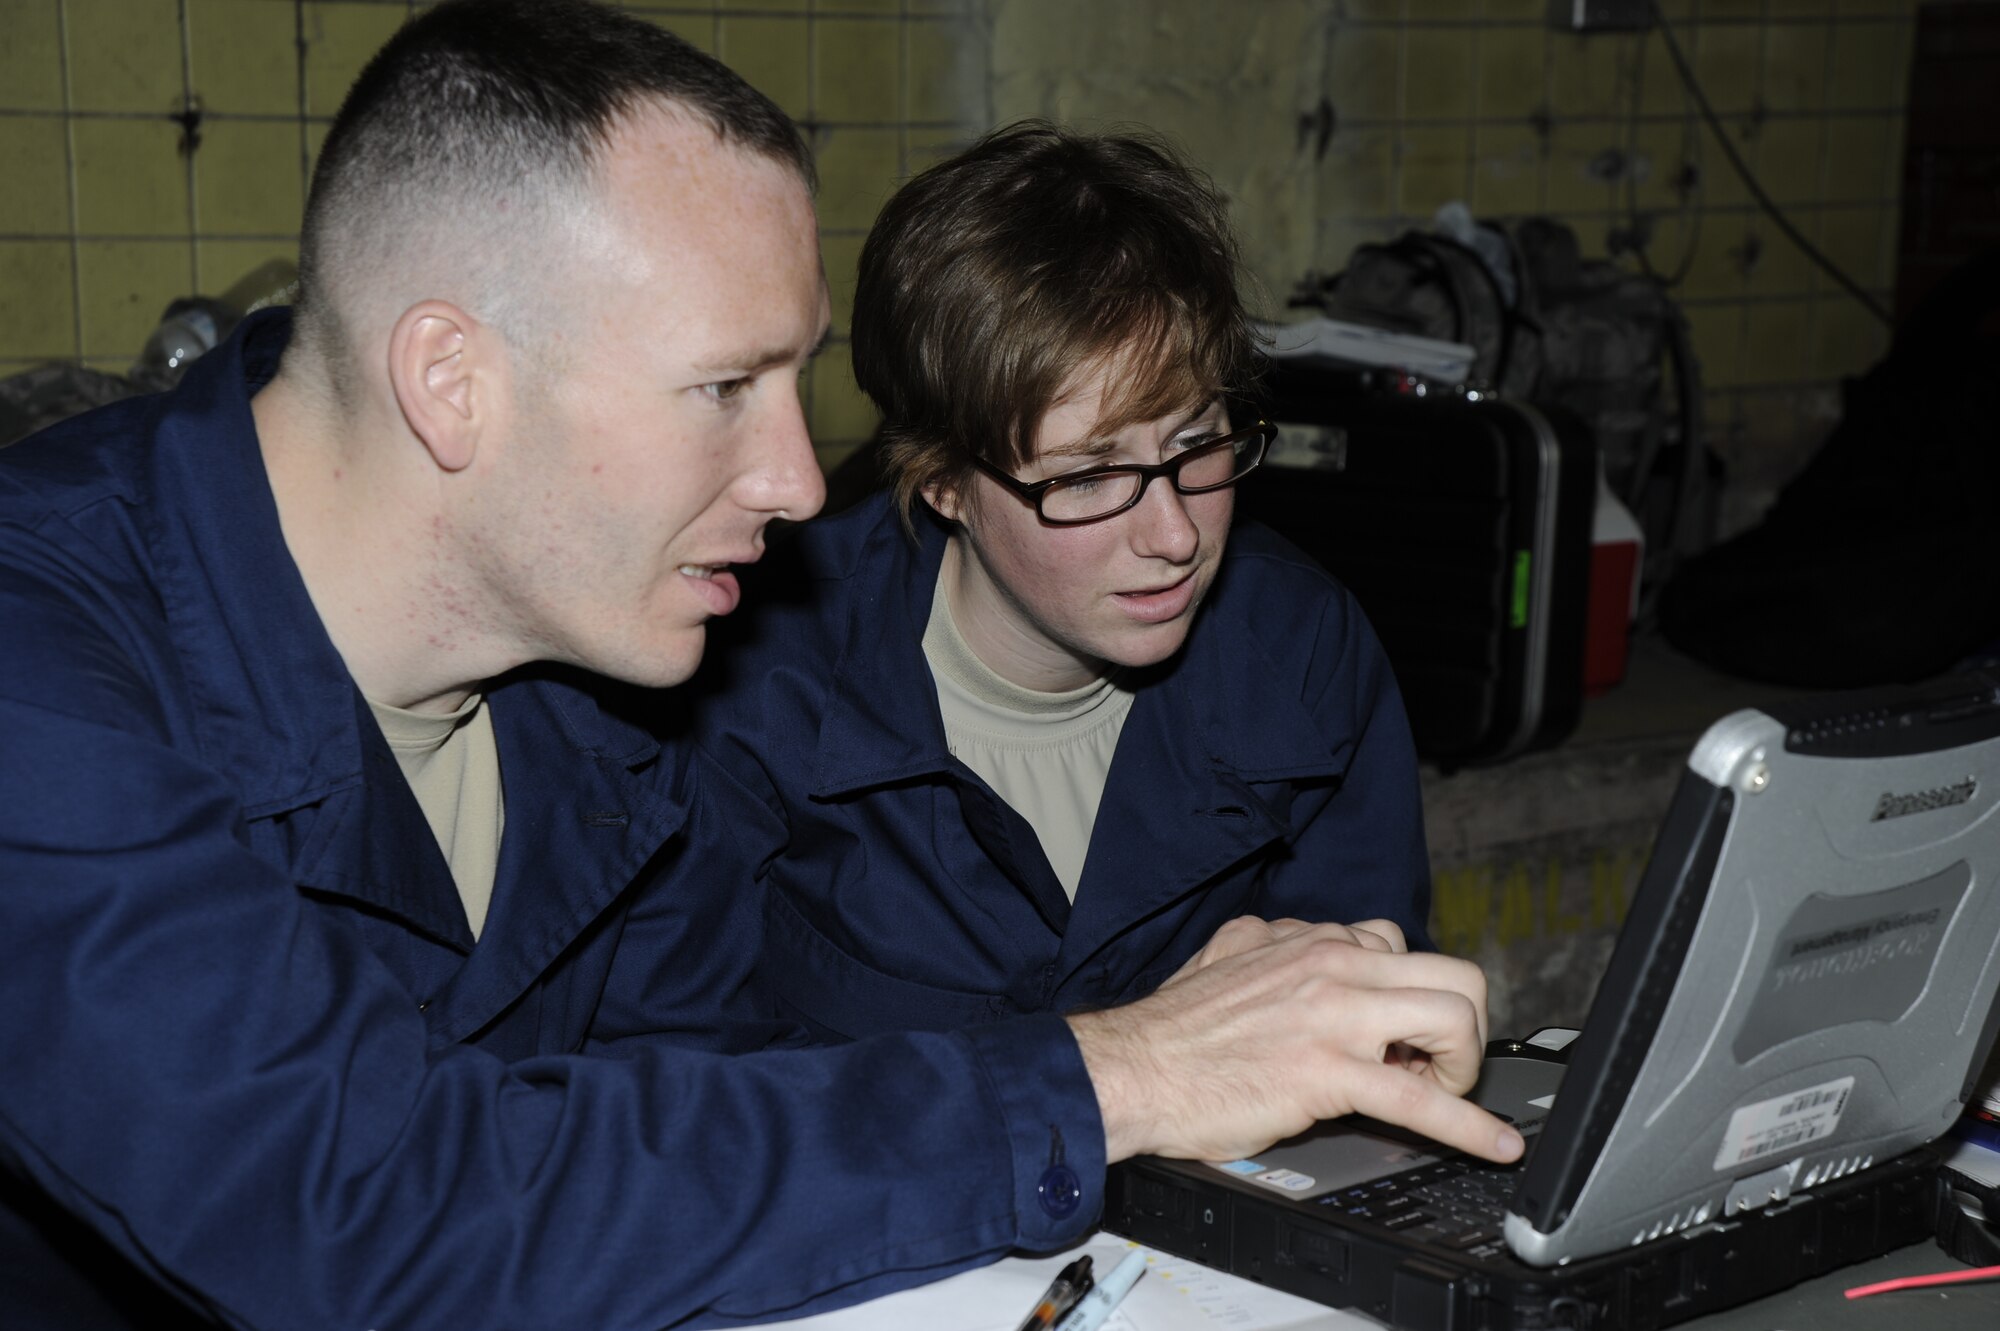 Senior Airman Eric Reist and Airman 1st Class Molly Clune, 11th Civil Engineer Squadron Readiness and Emergency Management, interpret results from radiological equipment March 27 during the Air Force District of Washington Black Flag Exercise held at the Center for National Response in Gallagher W.Va. Airmen from the 11th Civil Engineering Squadron and 779th Aerospace Medical Squadron, Joint Base Andrews, Md.; and the 579th Medical Operations Squadron, Joint Base Anacostia-Bolling, Washington D.C. came together for the joint training exercise. (U.S. Air Force photo by Staff Sgt. Christopher Ruano)